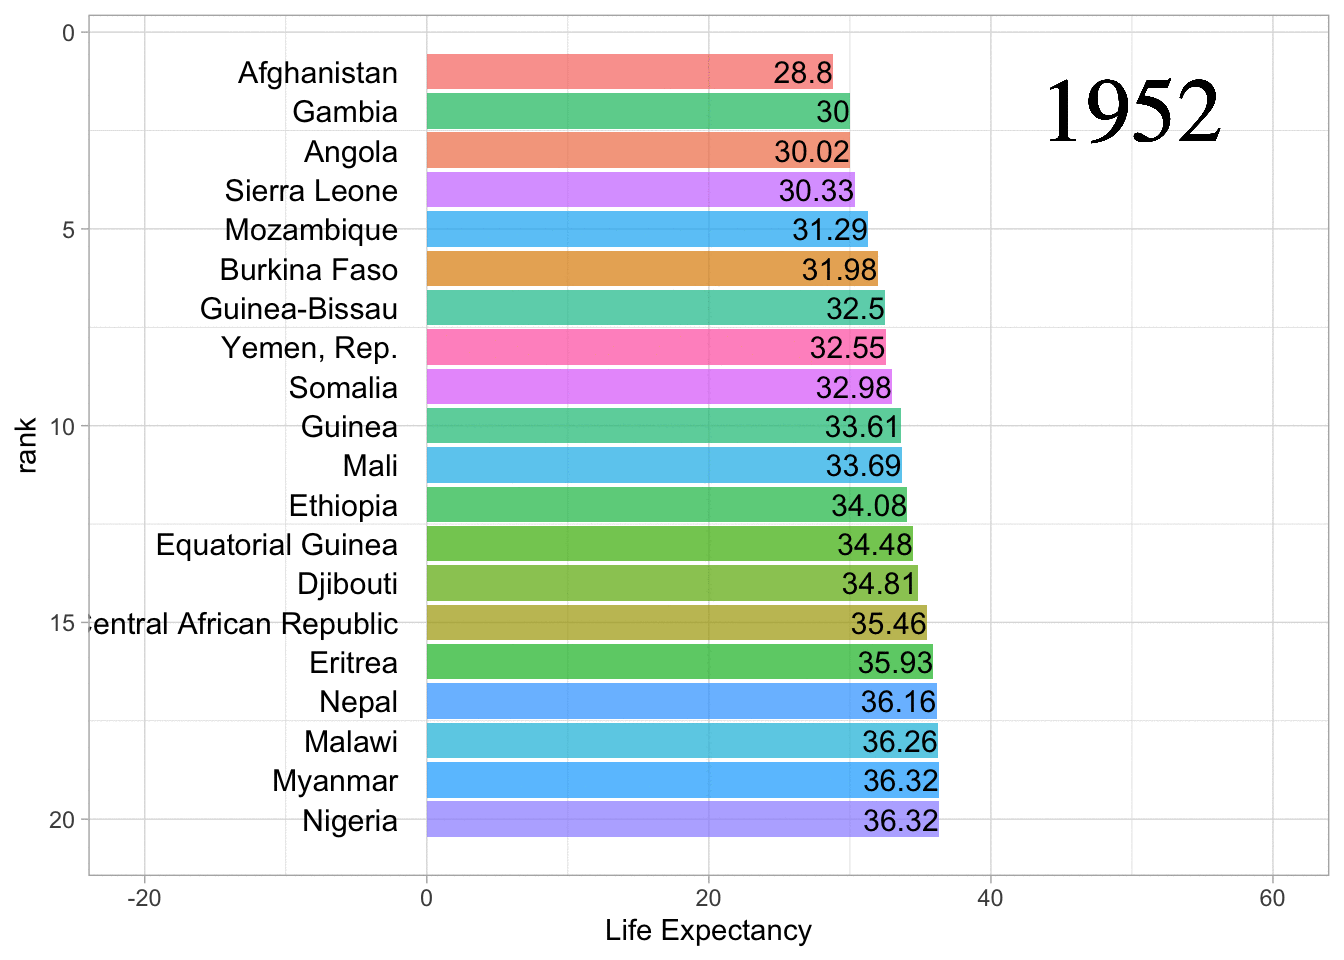 Racing bar chart of life expectancy from the 20 lowest countries